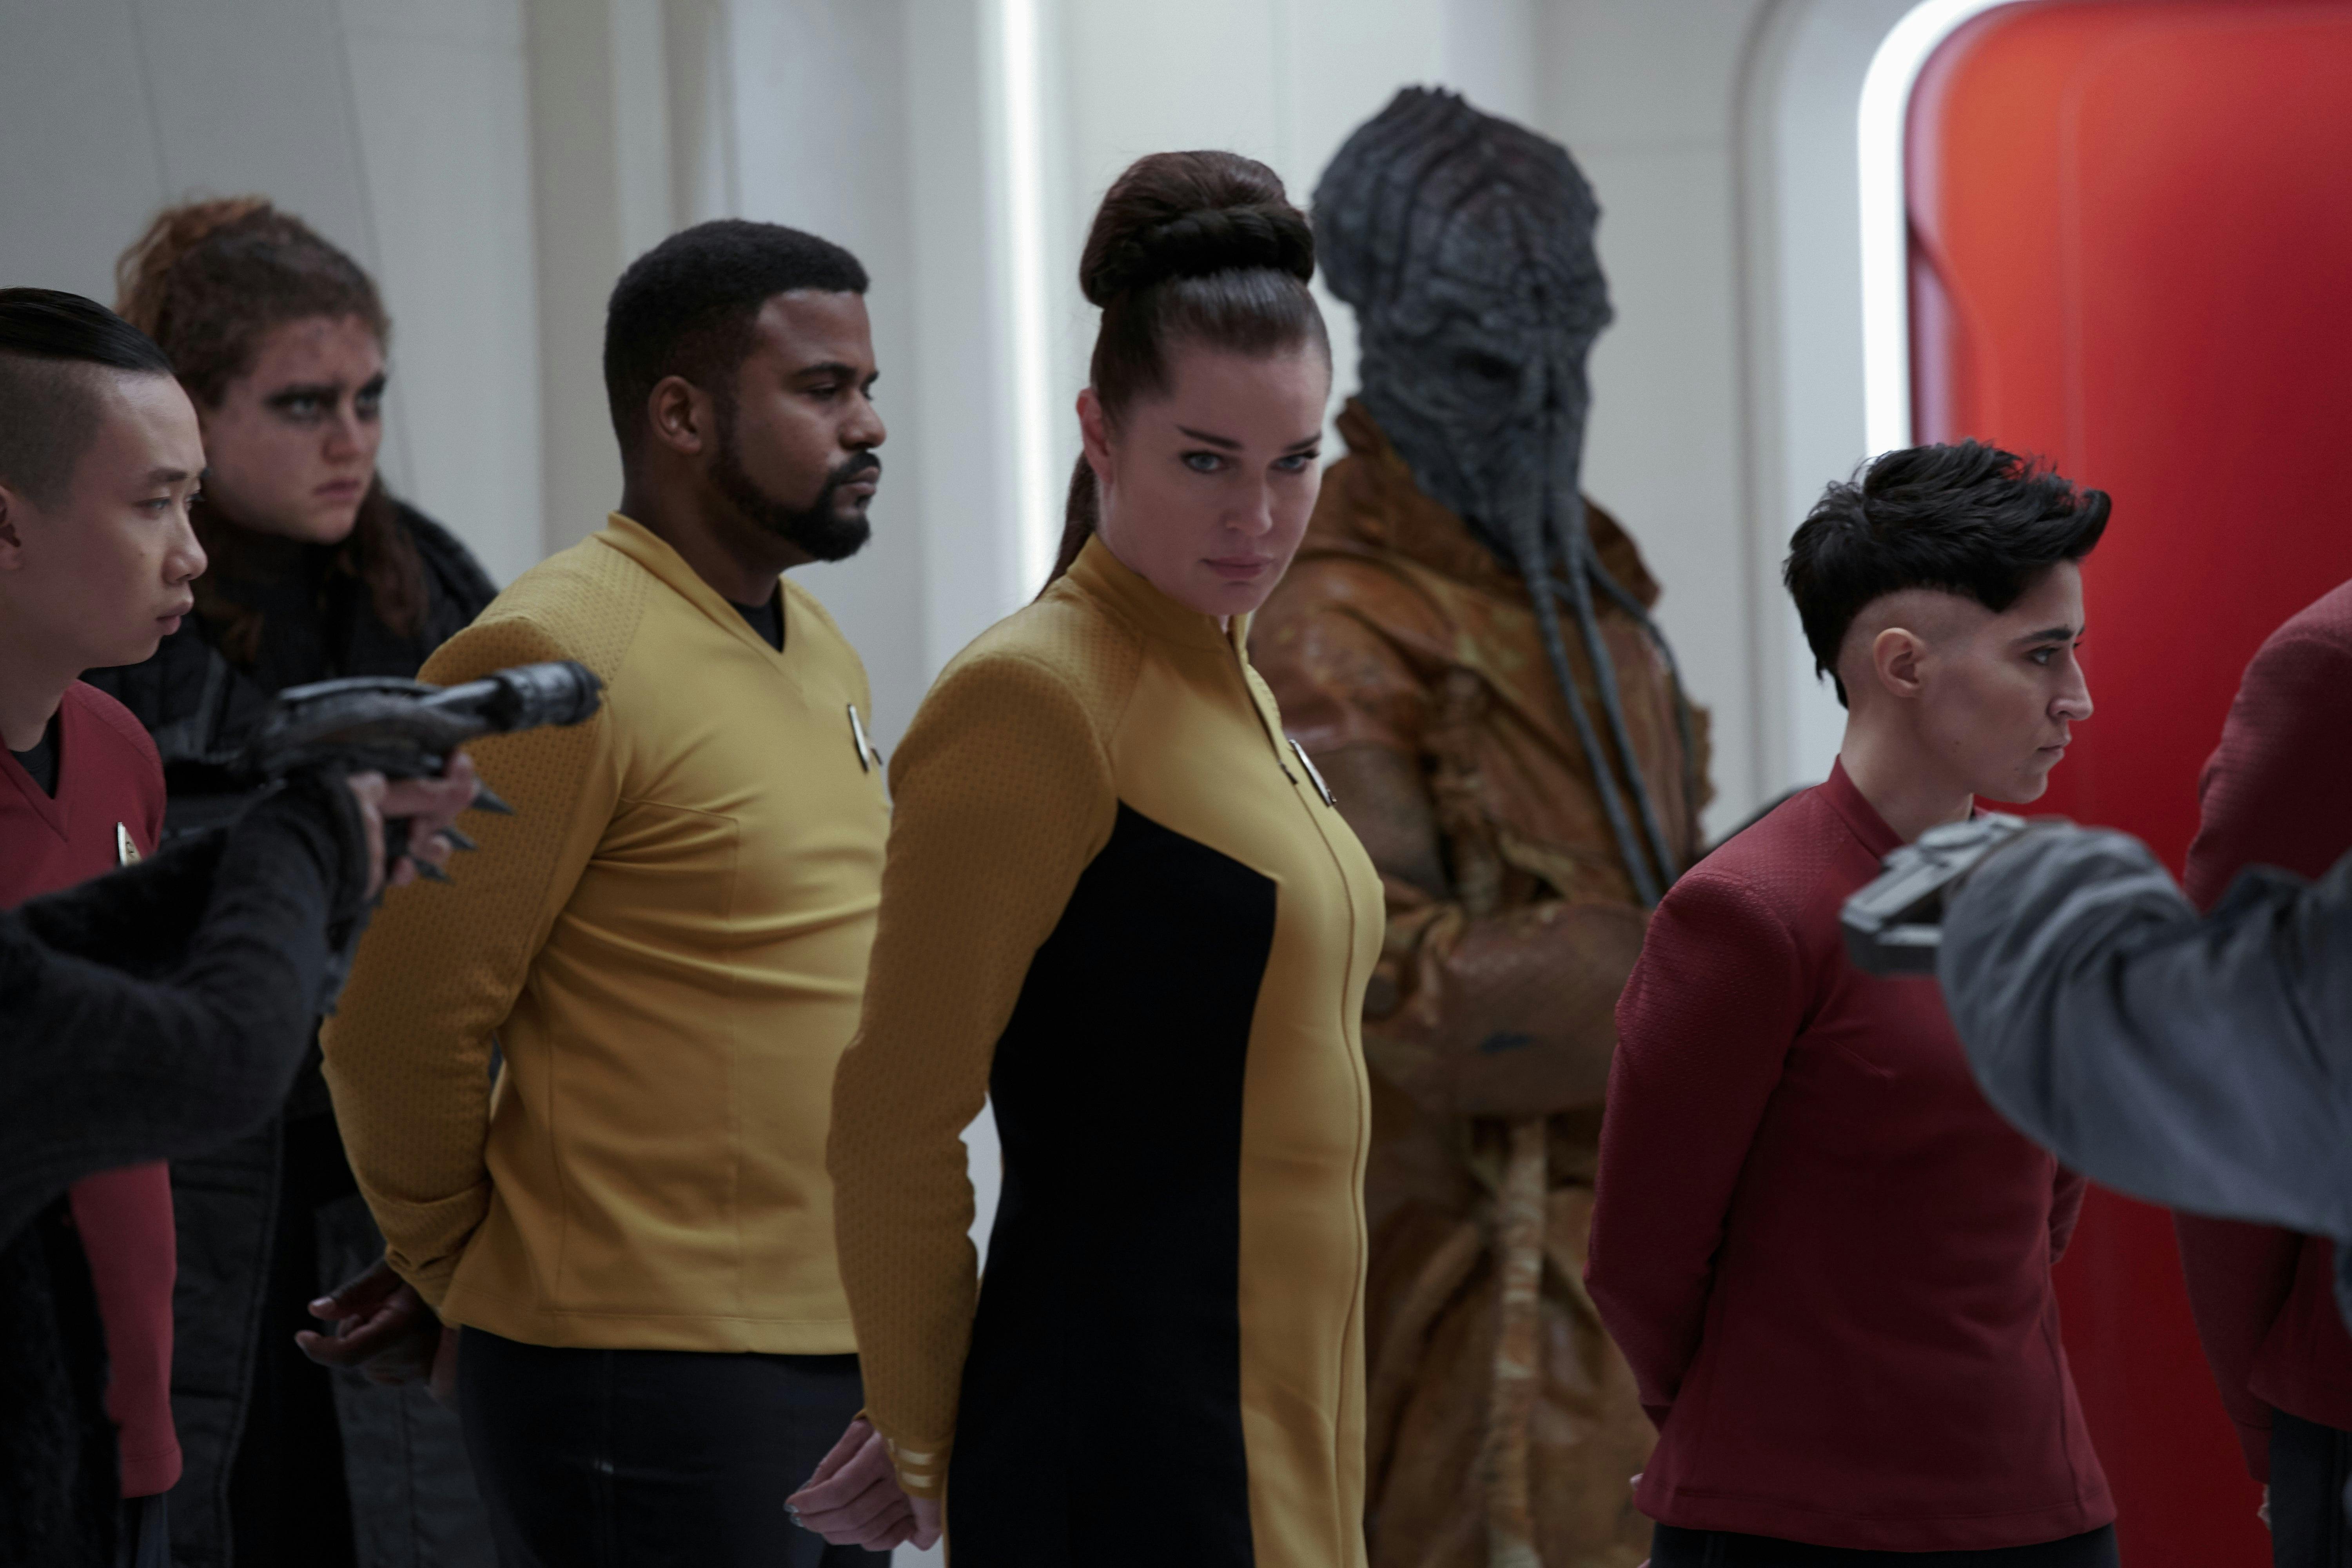 Number One (Rebecca Romijn) is in medbay, along with several other crewmembers including Erica Ortegas (Melissa Navia). Her hands are cuffed behind her back and she is looking to the side.